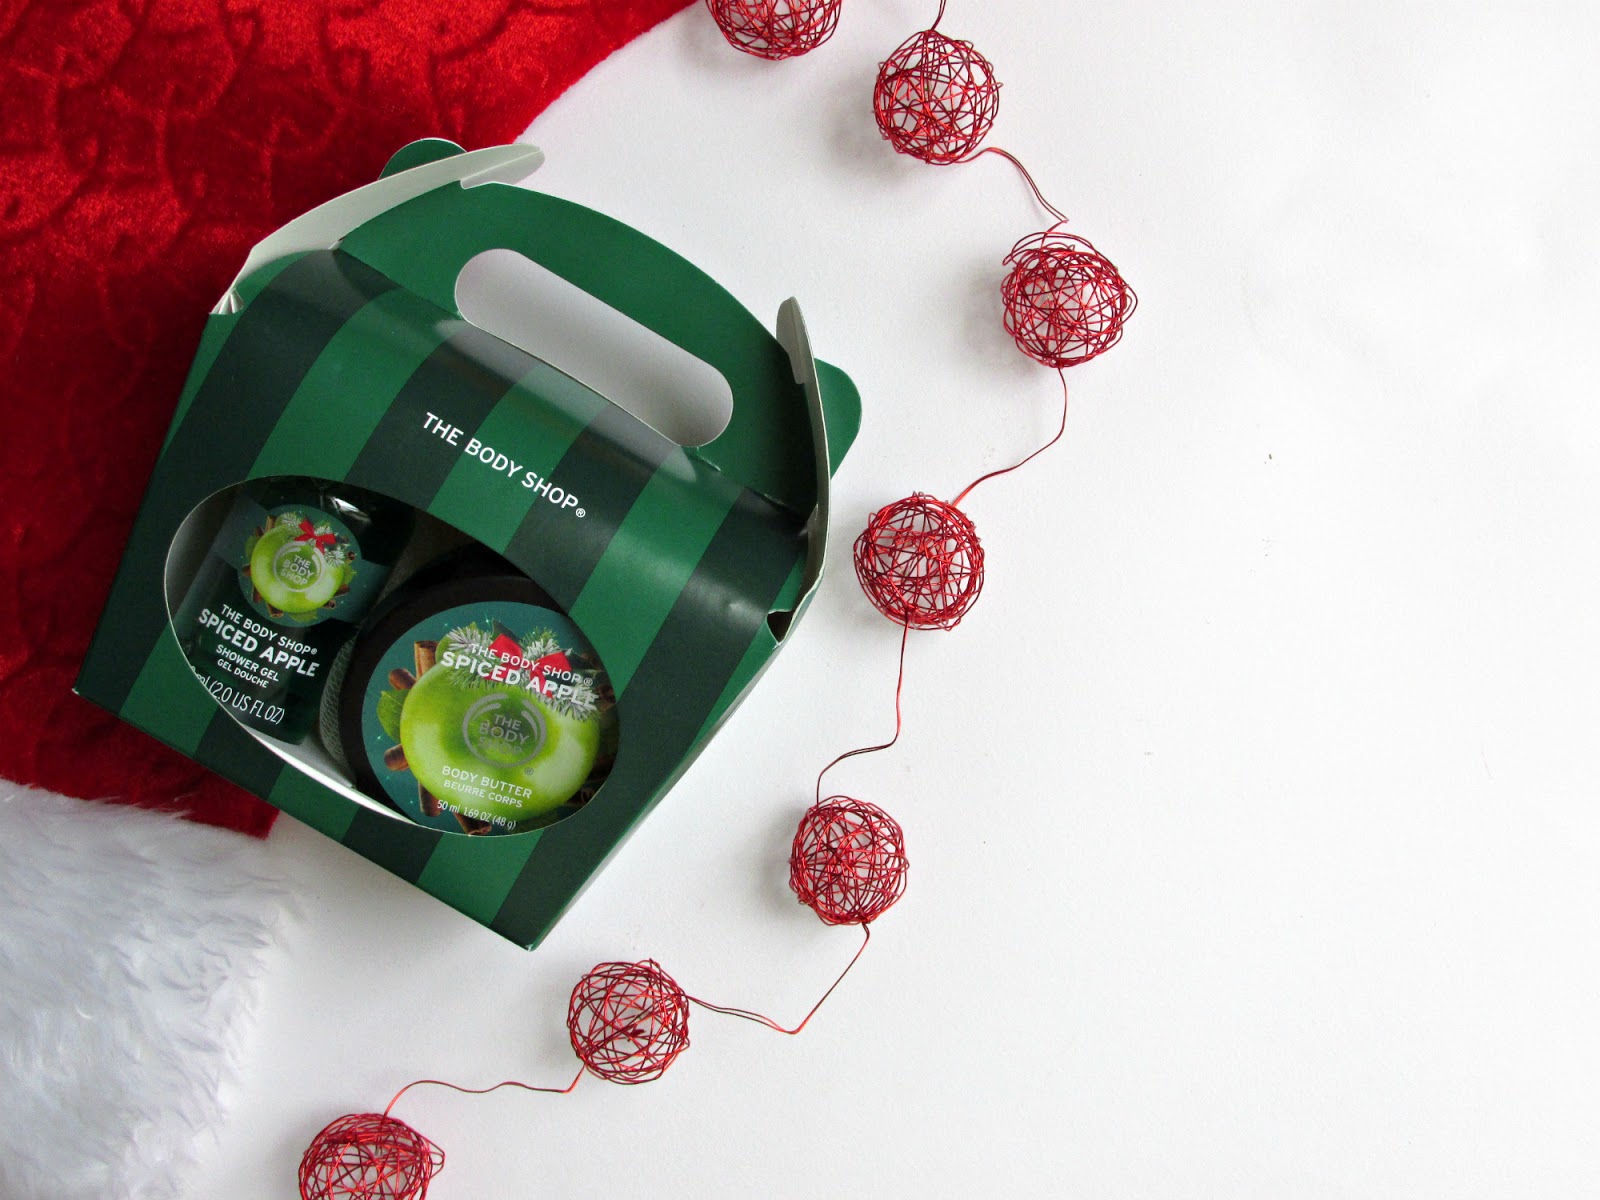 Christmas giveaway, the body shop spiced apple treat box